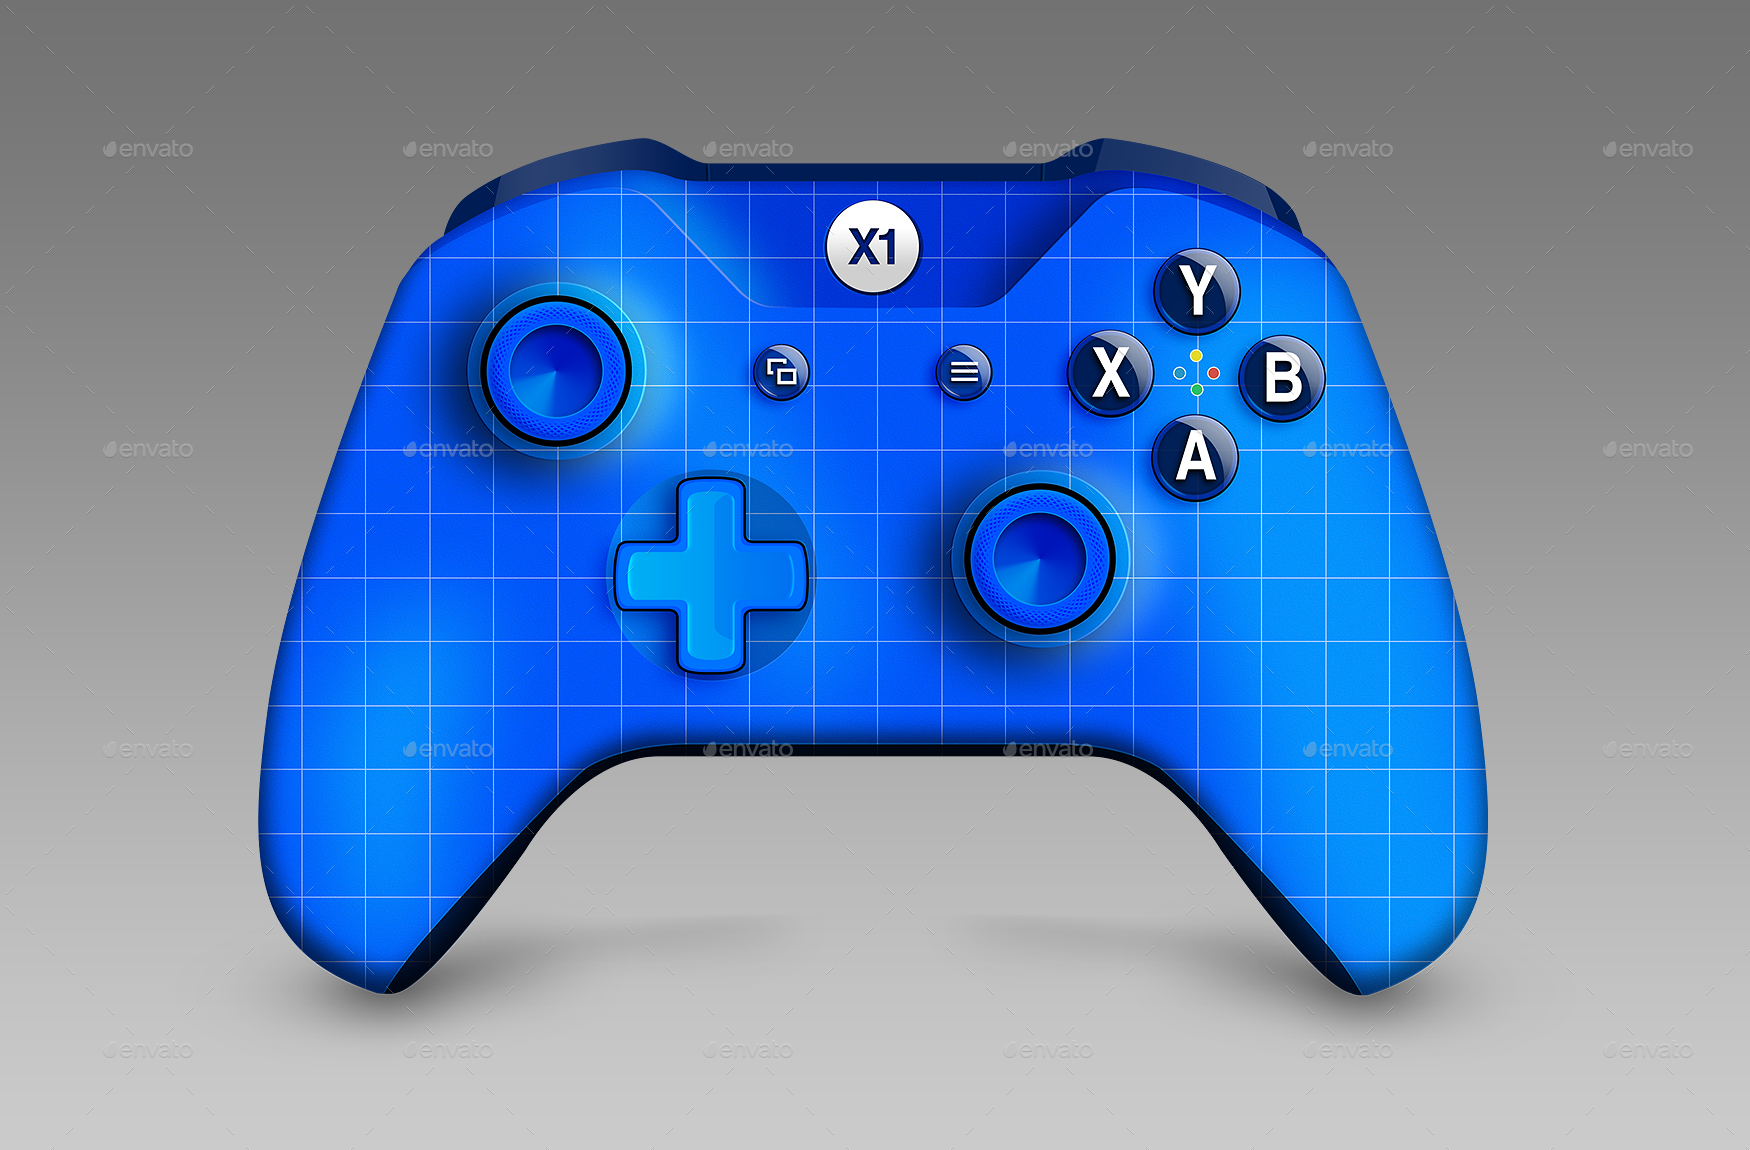 Download X1 Gaming Controller Mockup by designinfekt | GraphicRiver